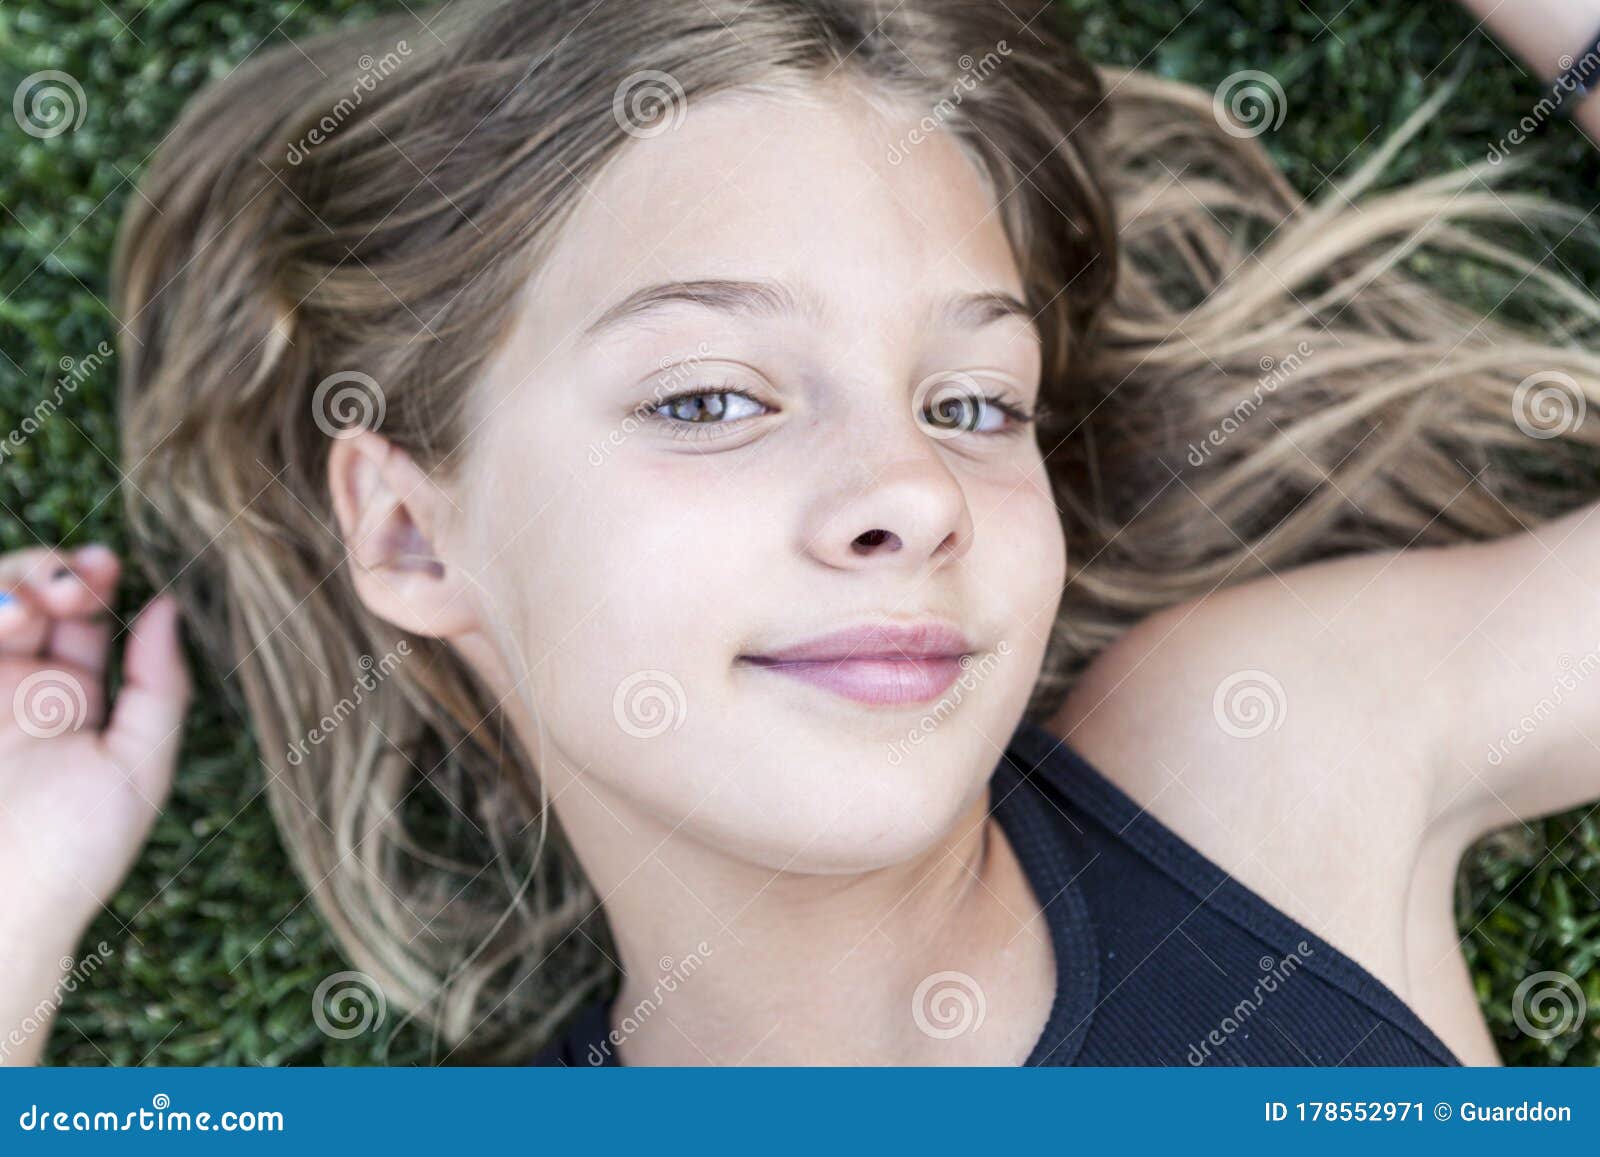 Cute Young Girl Having Fun on a Grass Stock Image - Image of ...